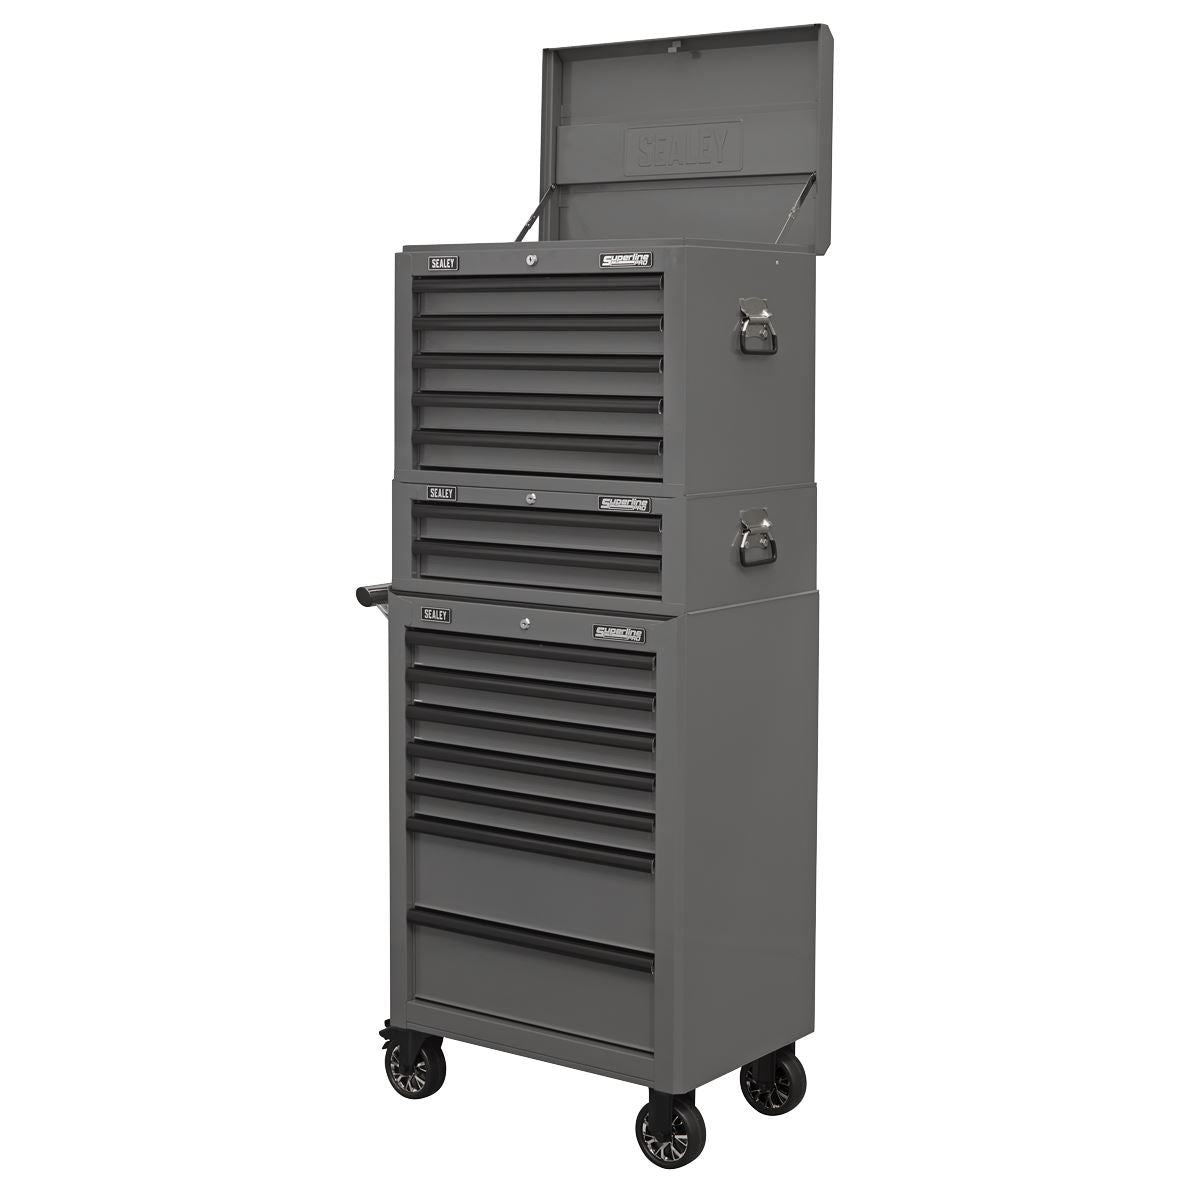 Sealey Superline Pro Topchest, Mid-Box Tool Chest & Rollcab Combination 14 Drawer with Ball-Bearing Slides - Grey